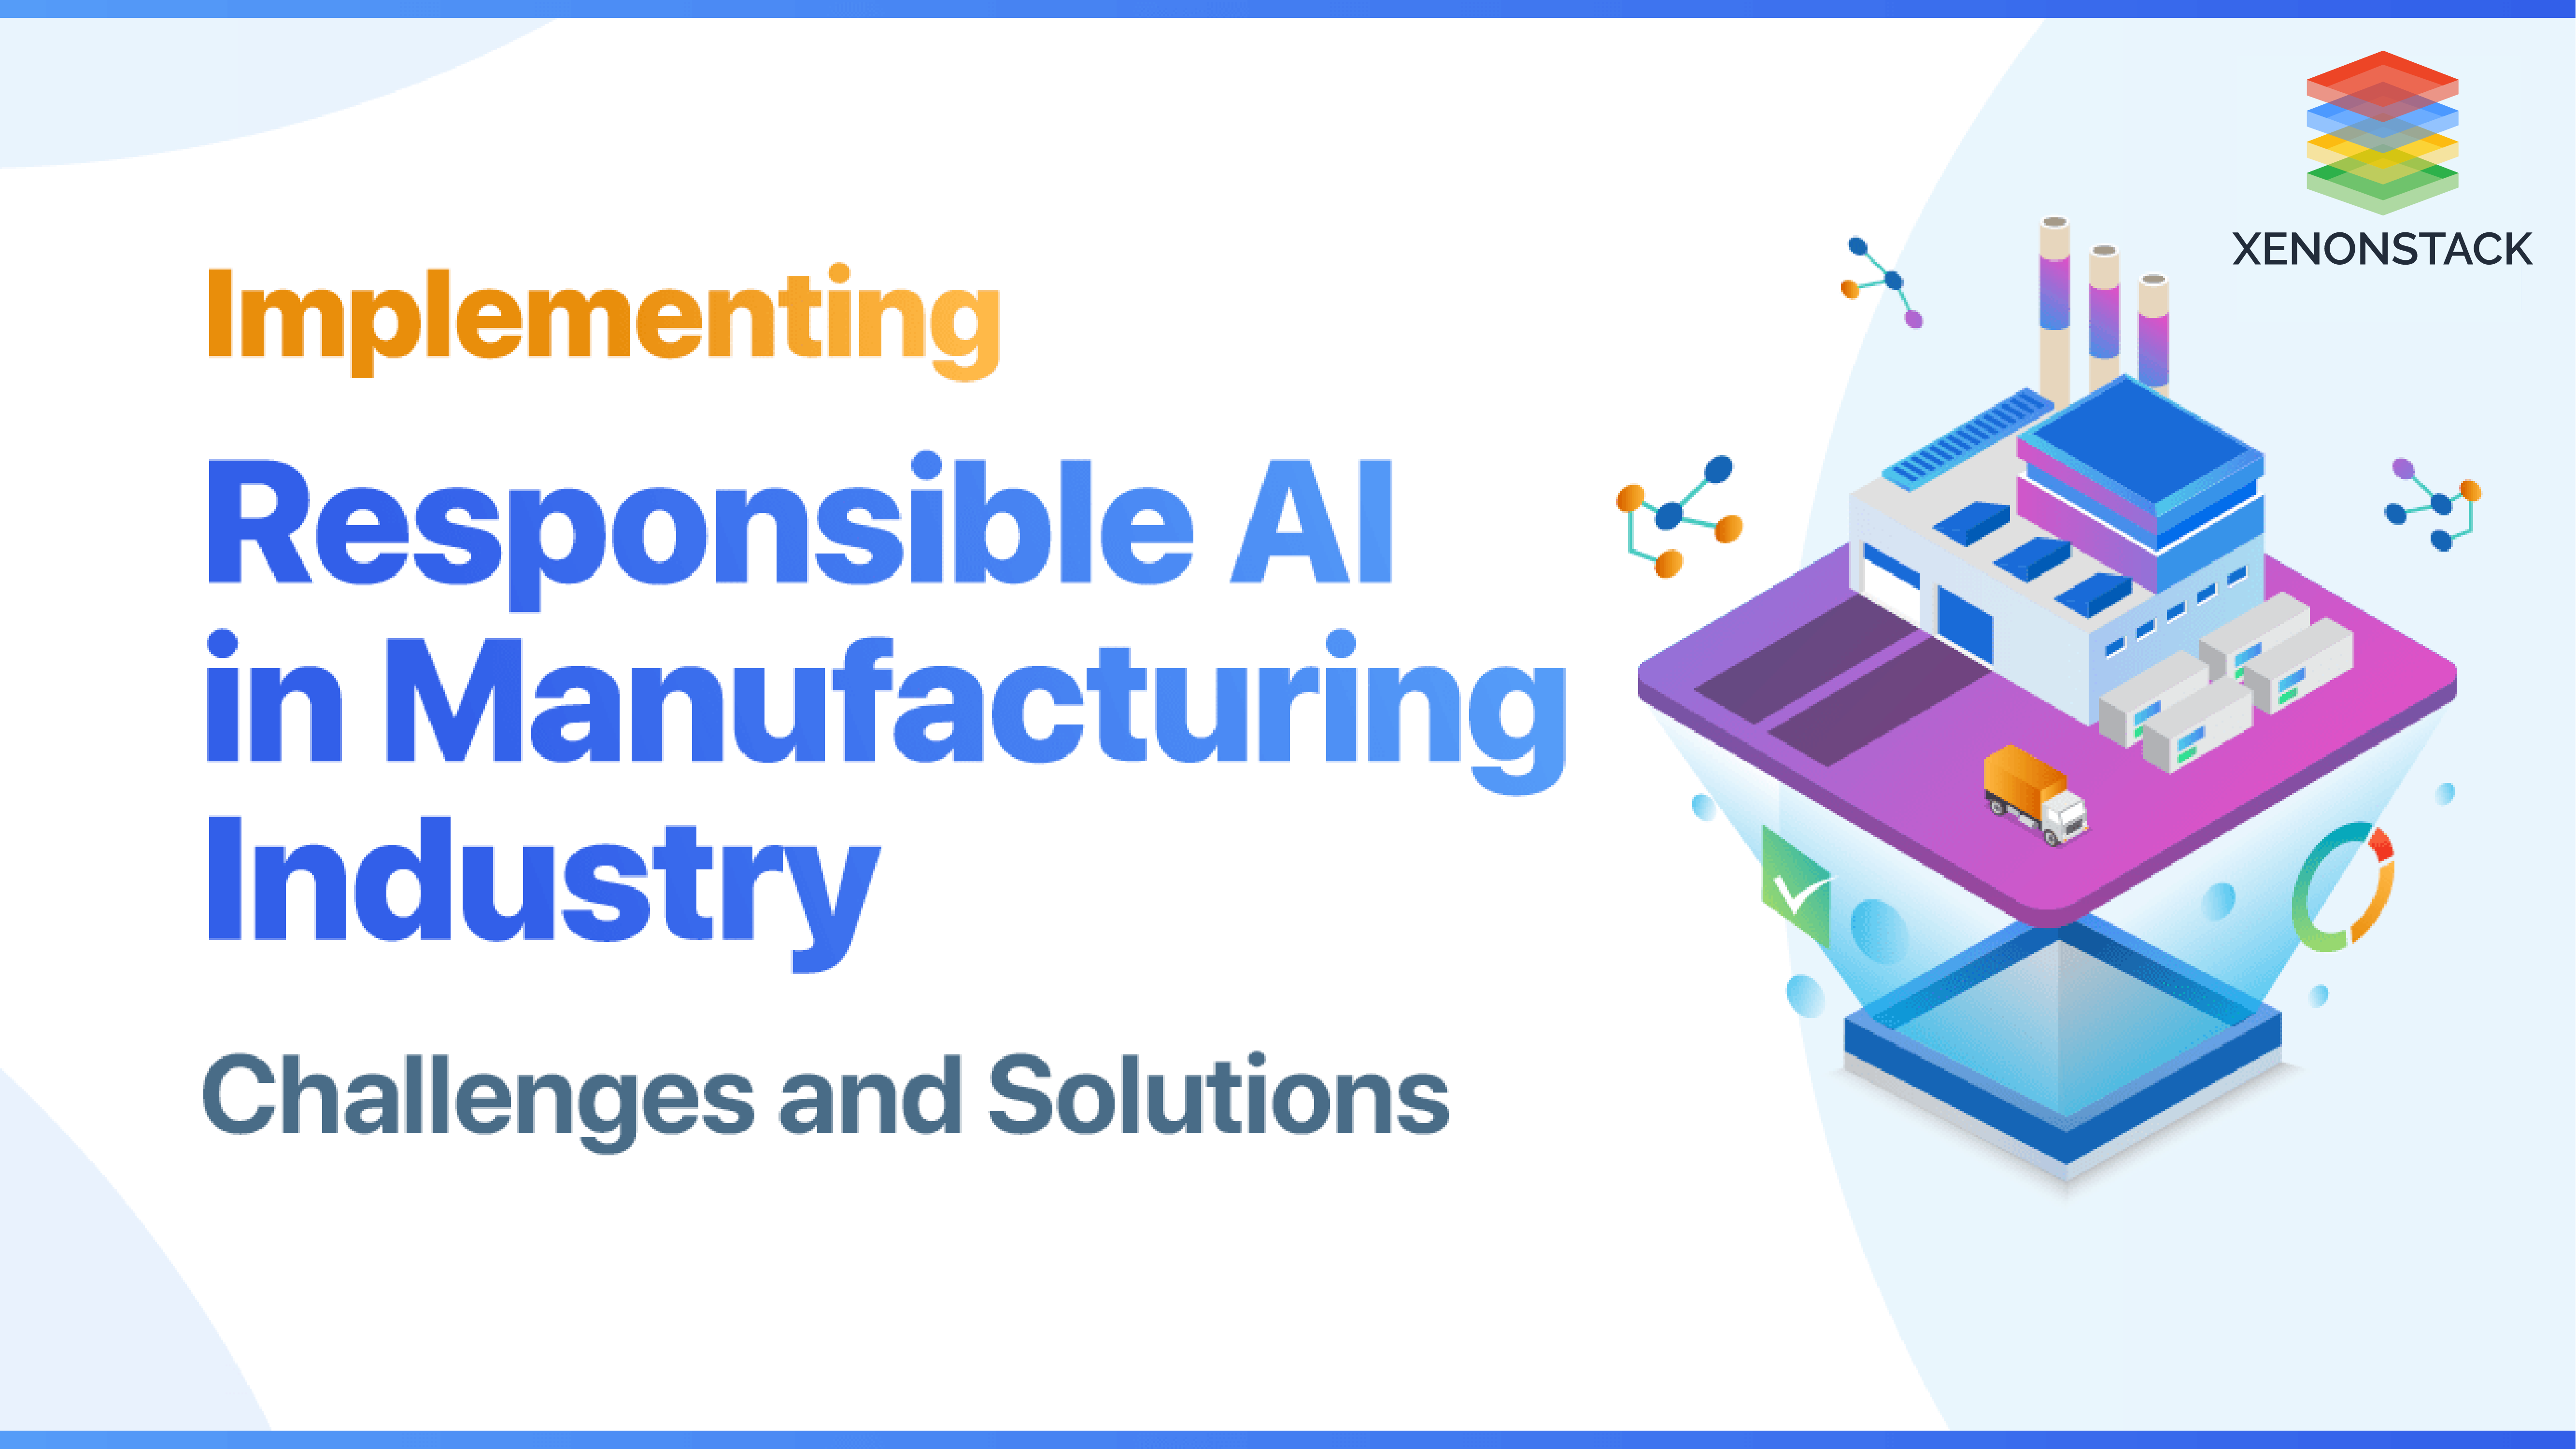 Responsible AI in Manufacturing Industry